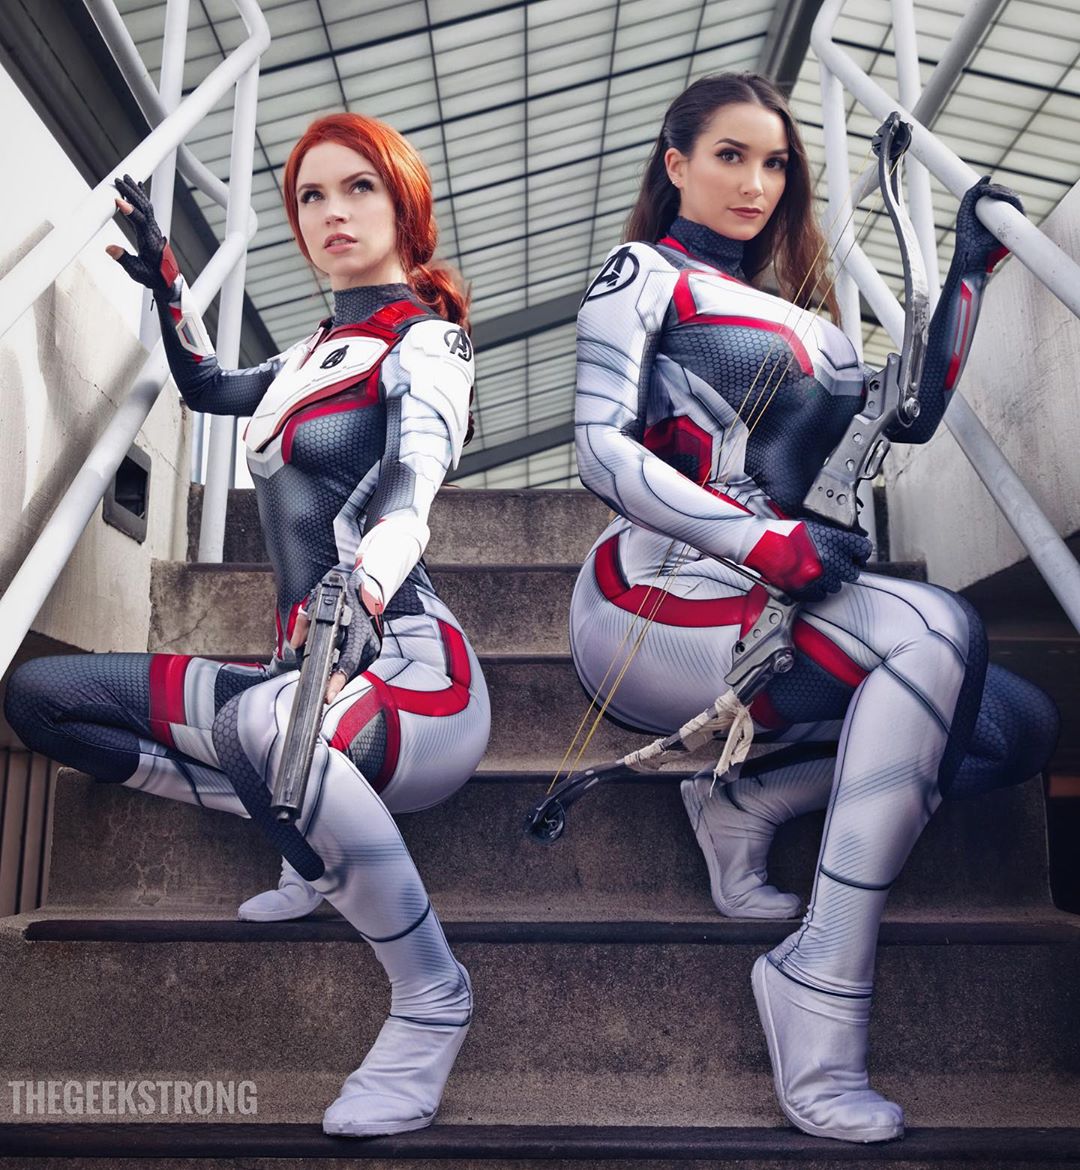 Armoredheartcosplay As Black Widow And Themoriahlynne As Hawkey